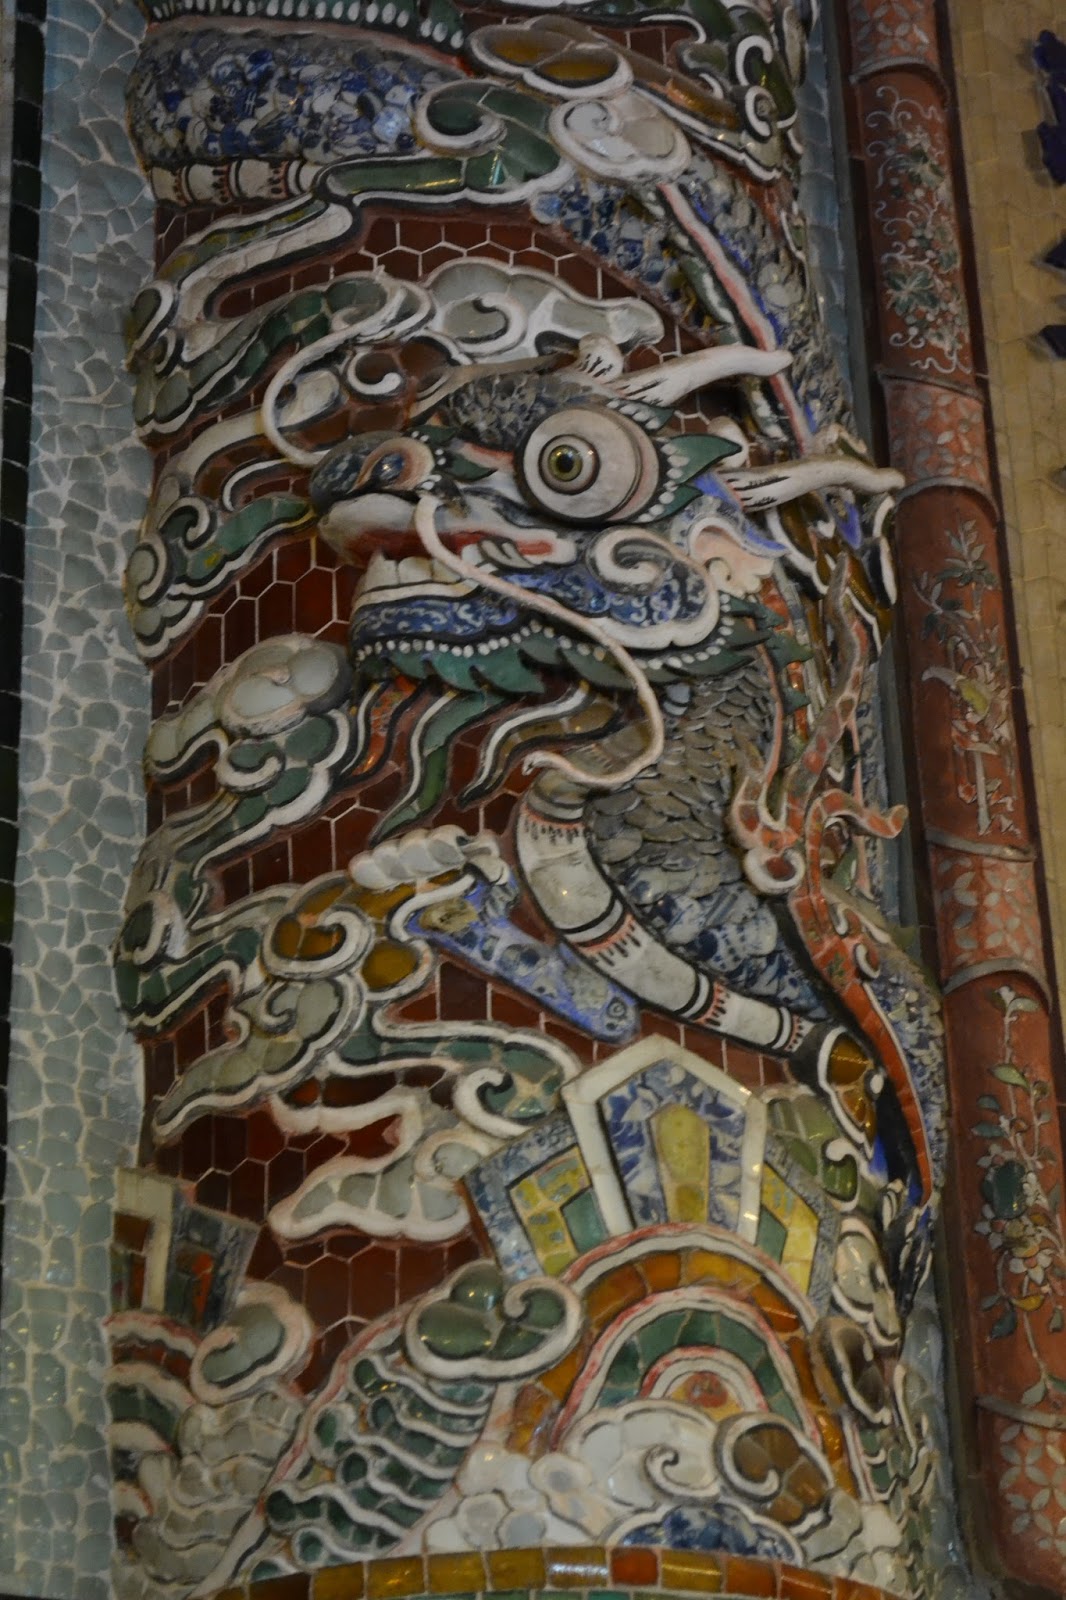 Beautiful mosaic design on the wall of the tomb